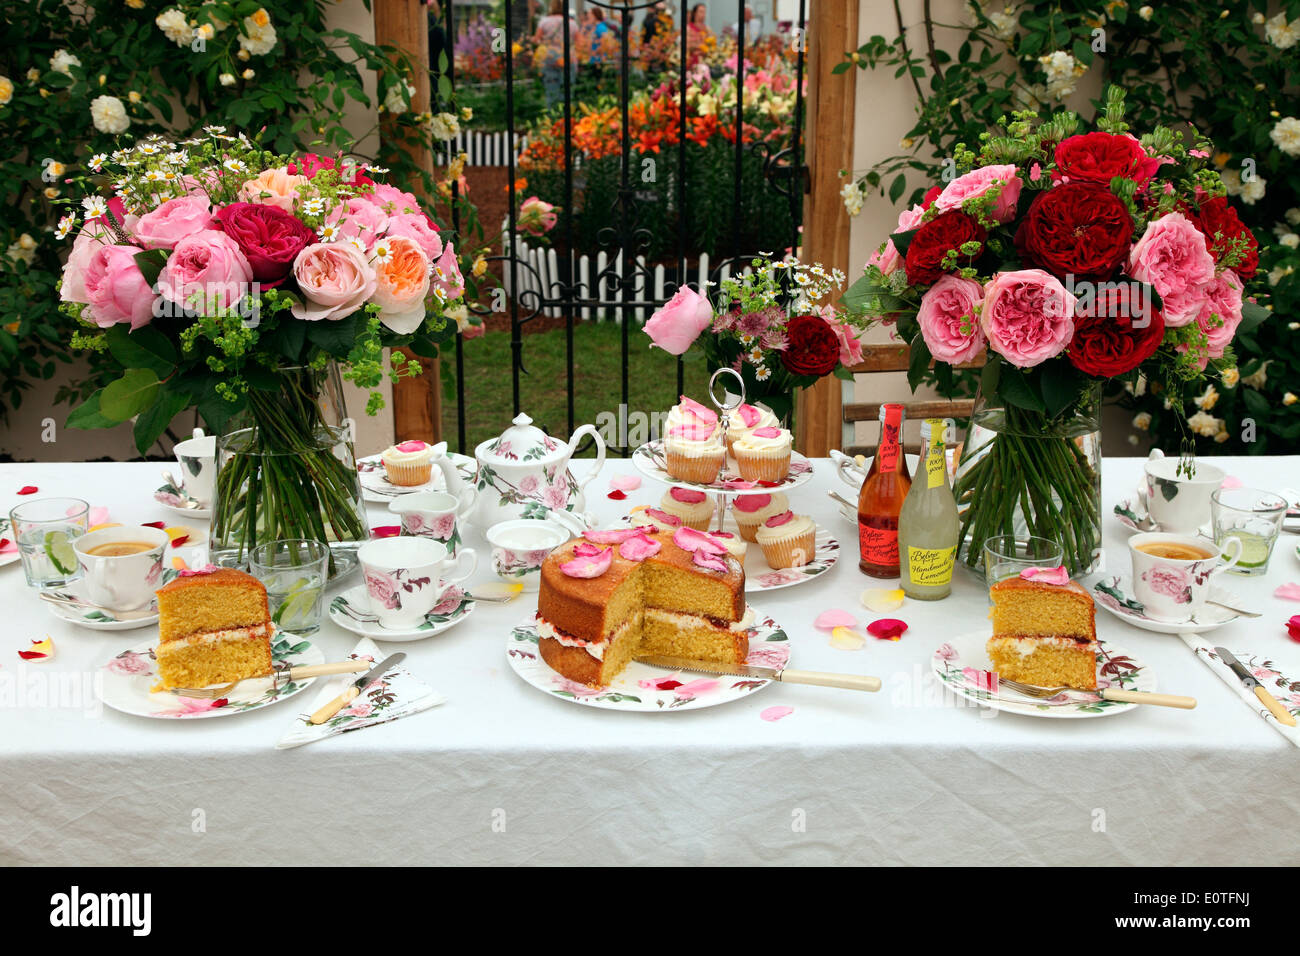 afternoon tea at the david austin roses exhibit at the rhs chelsea